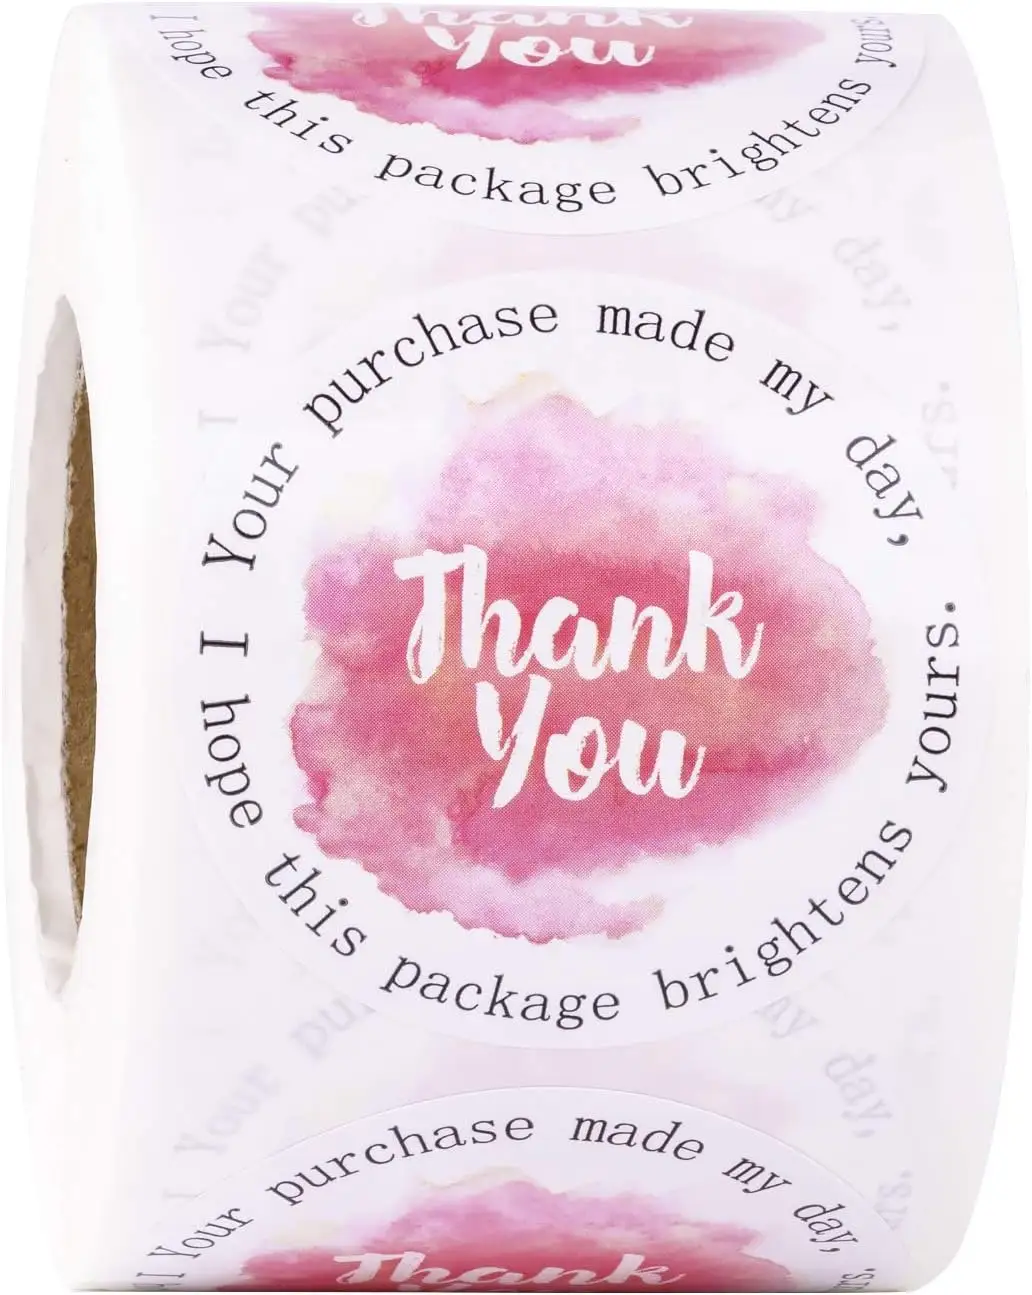 Thank You Sticker Free Gift Box Packaging Decorative Label 500Pcs/Roll Thank You Stickers For Small Business